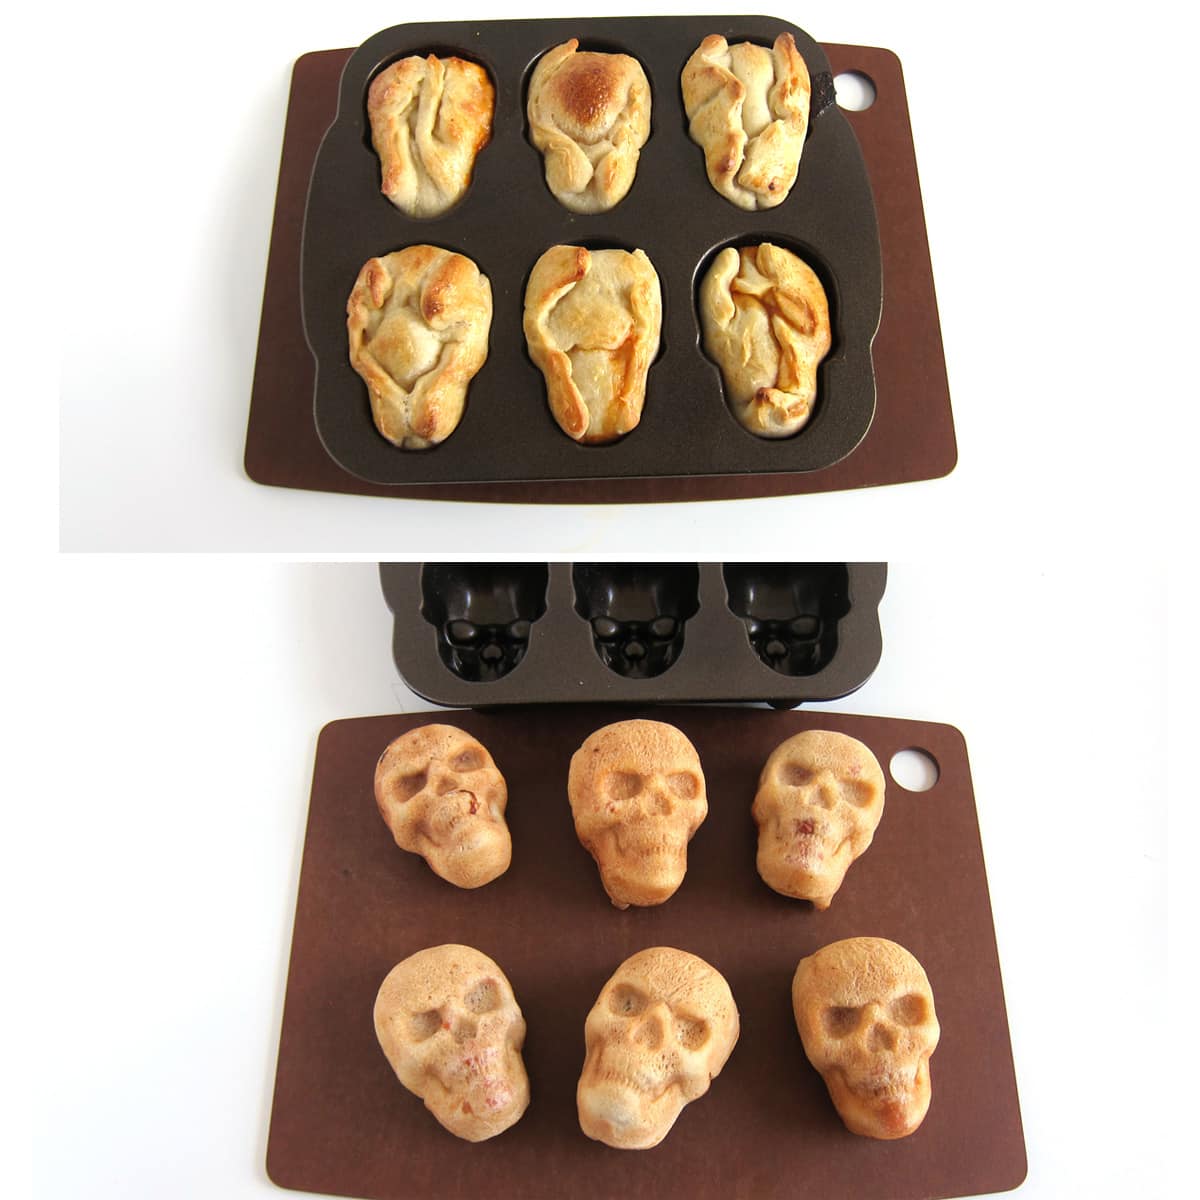 un-molding the pizza skulls from a Nordicware pan.